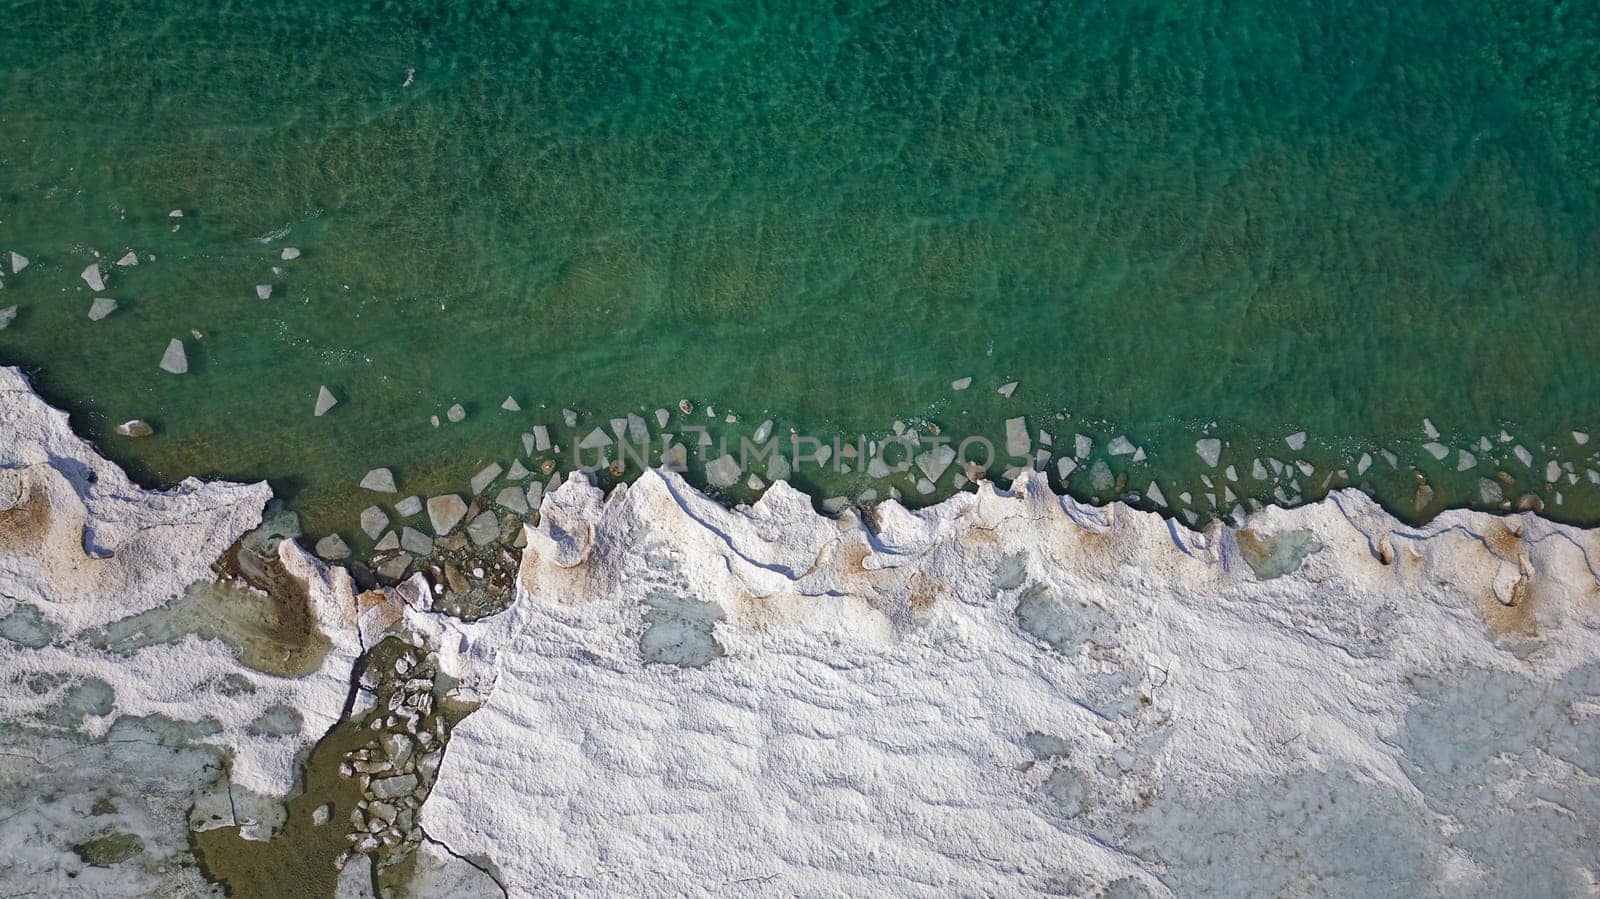 Drone shot of Georgian Bay Ice Pack Breaking Up and Melting in February when unseasonably warm by markvandam